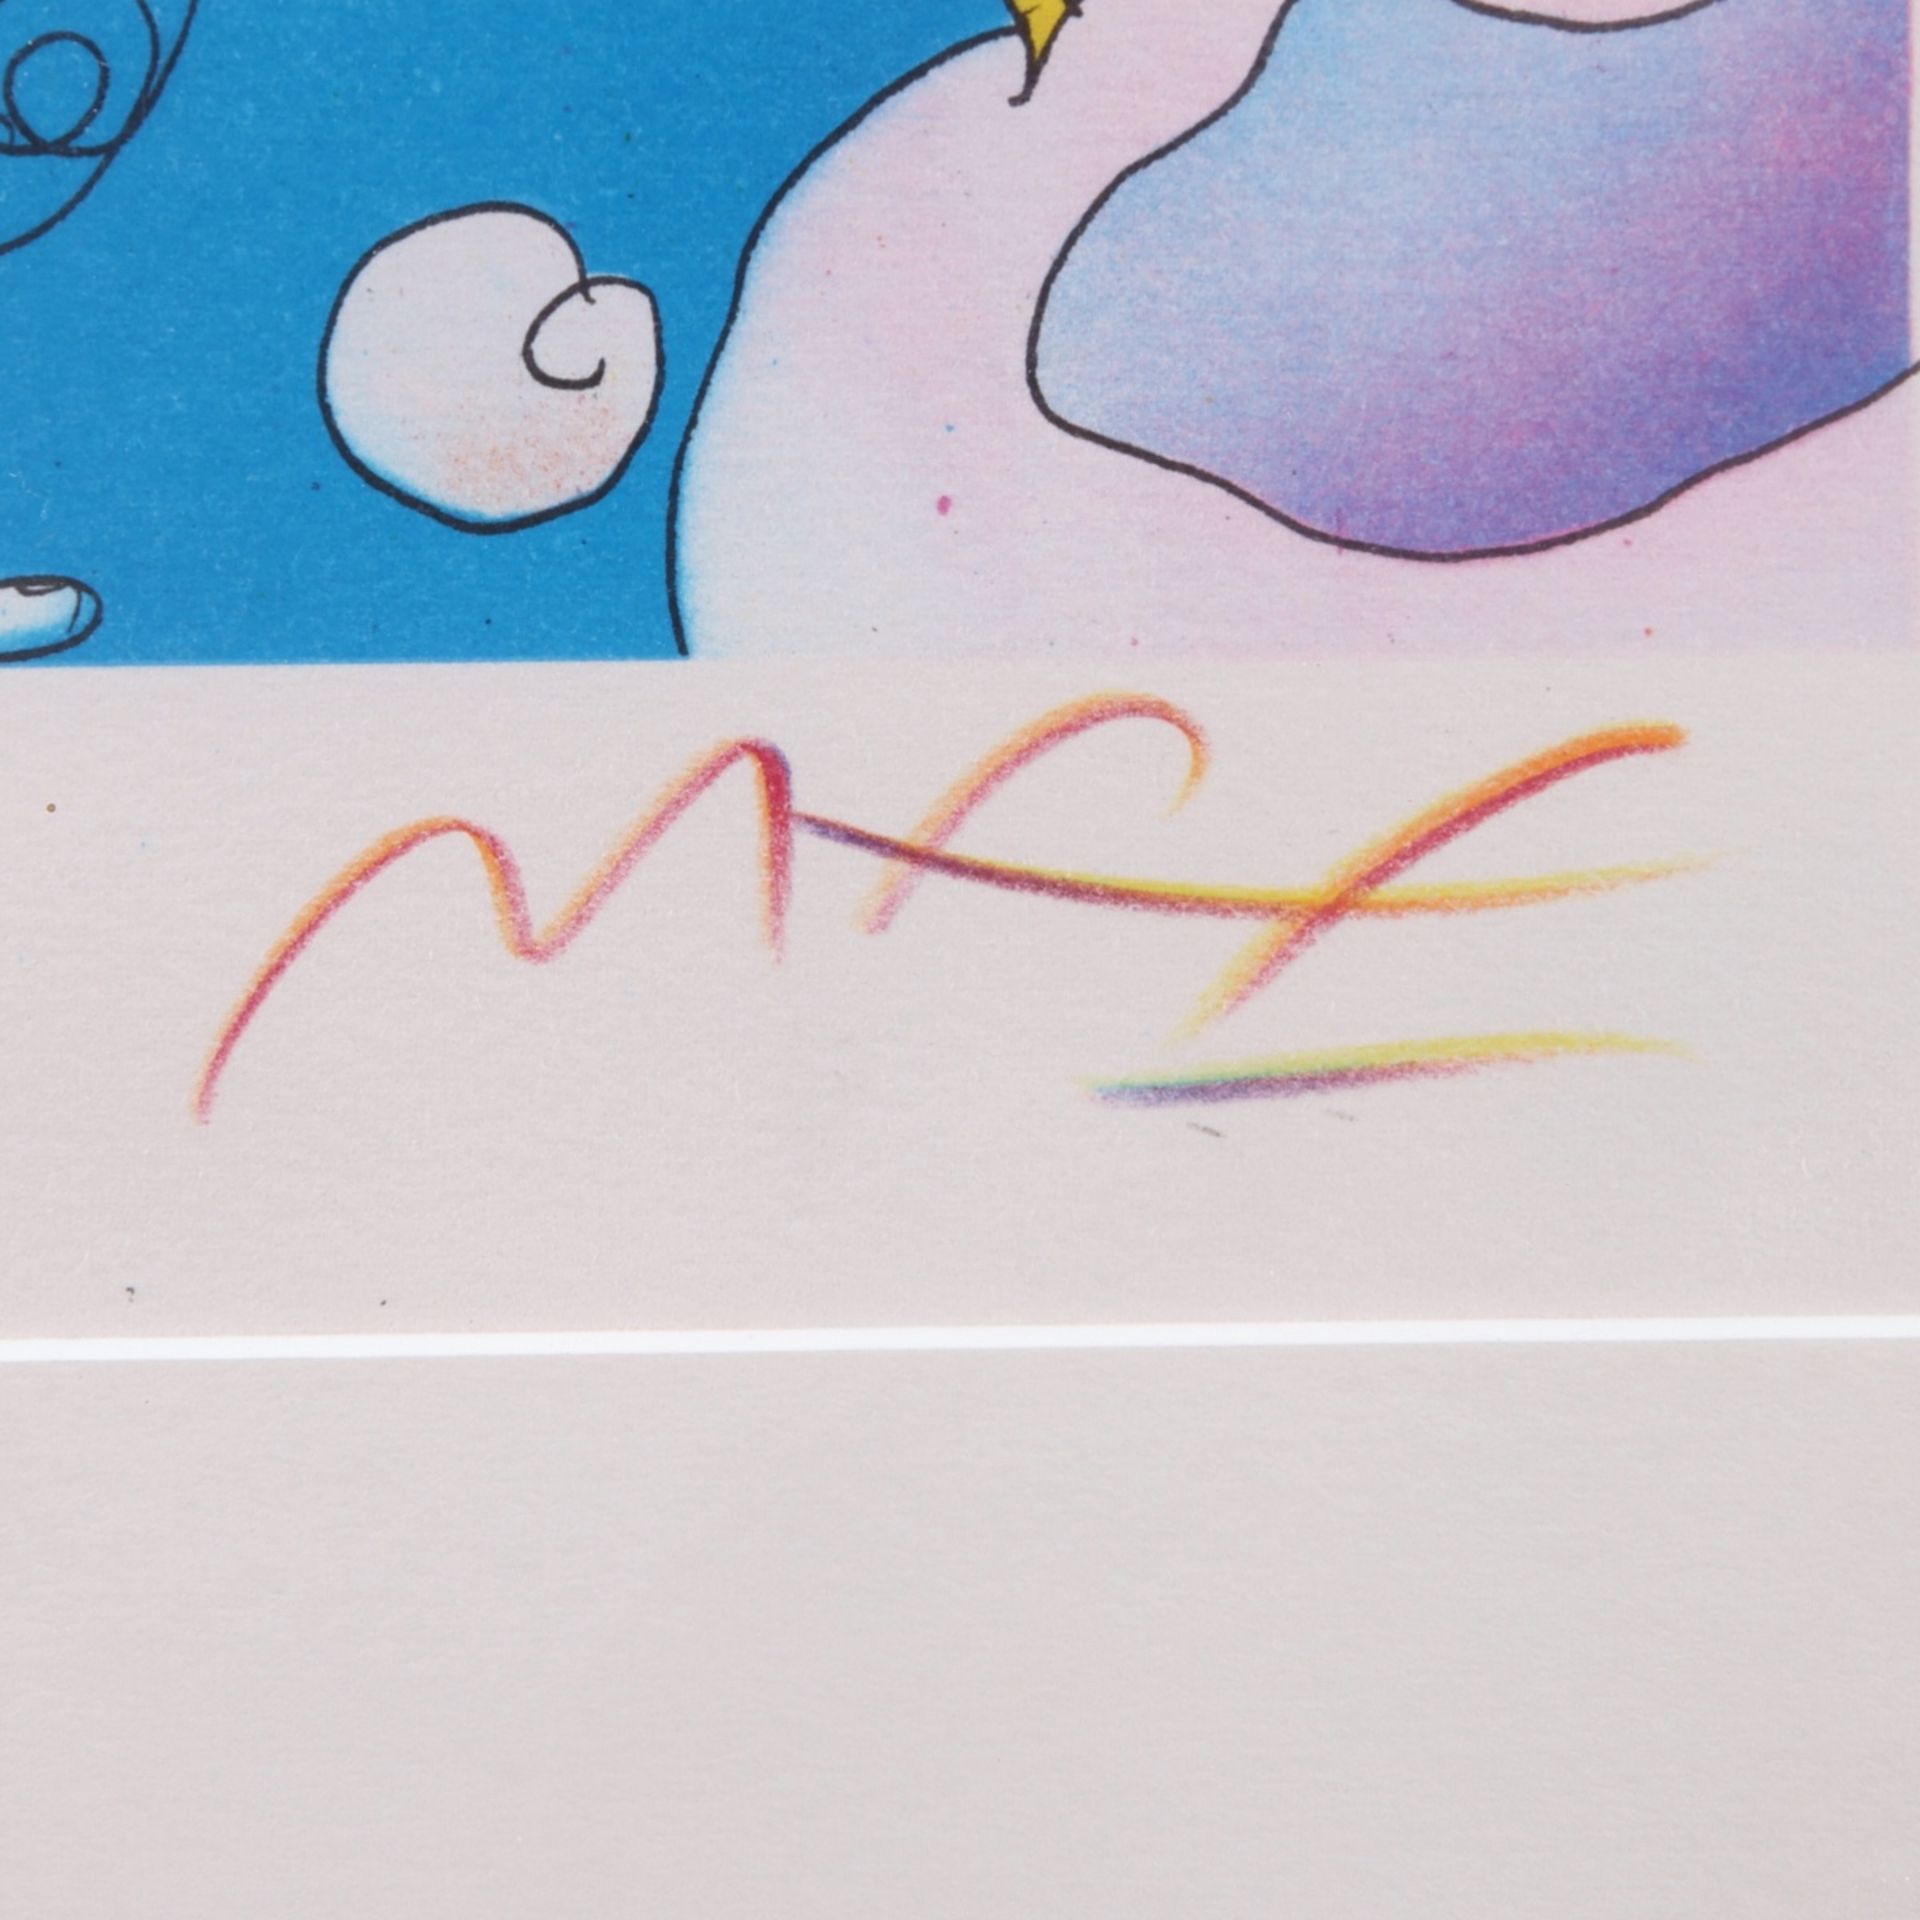 Peter Max "Galactic Man" Lithograph - Image 4 of 5